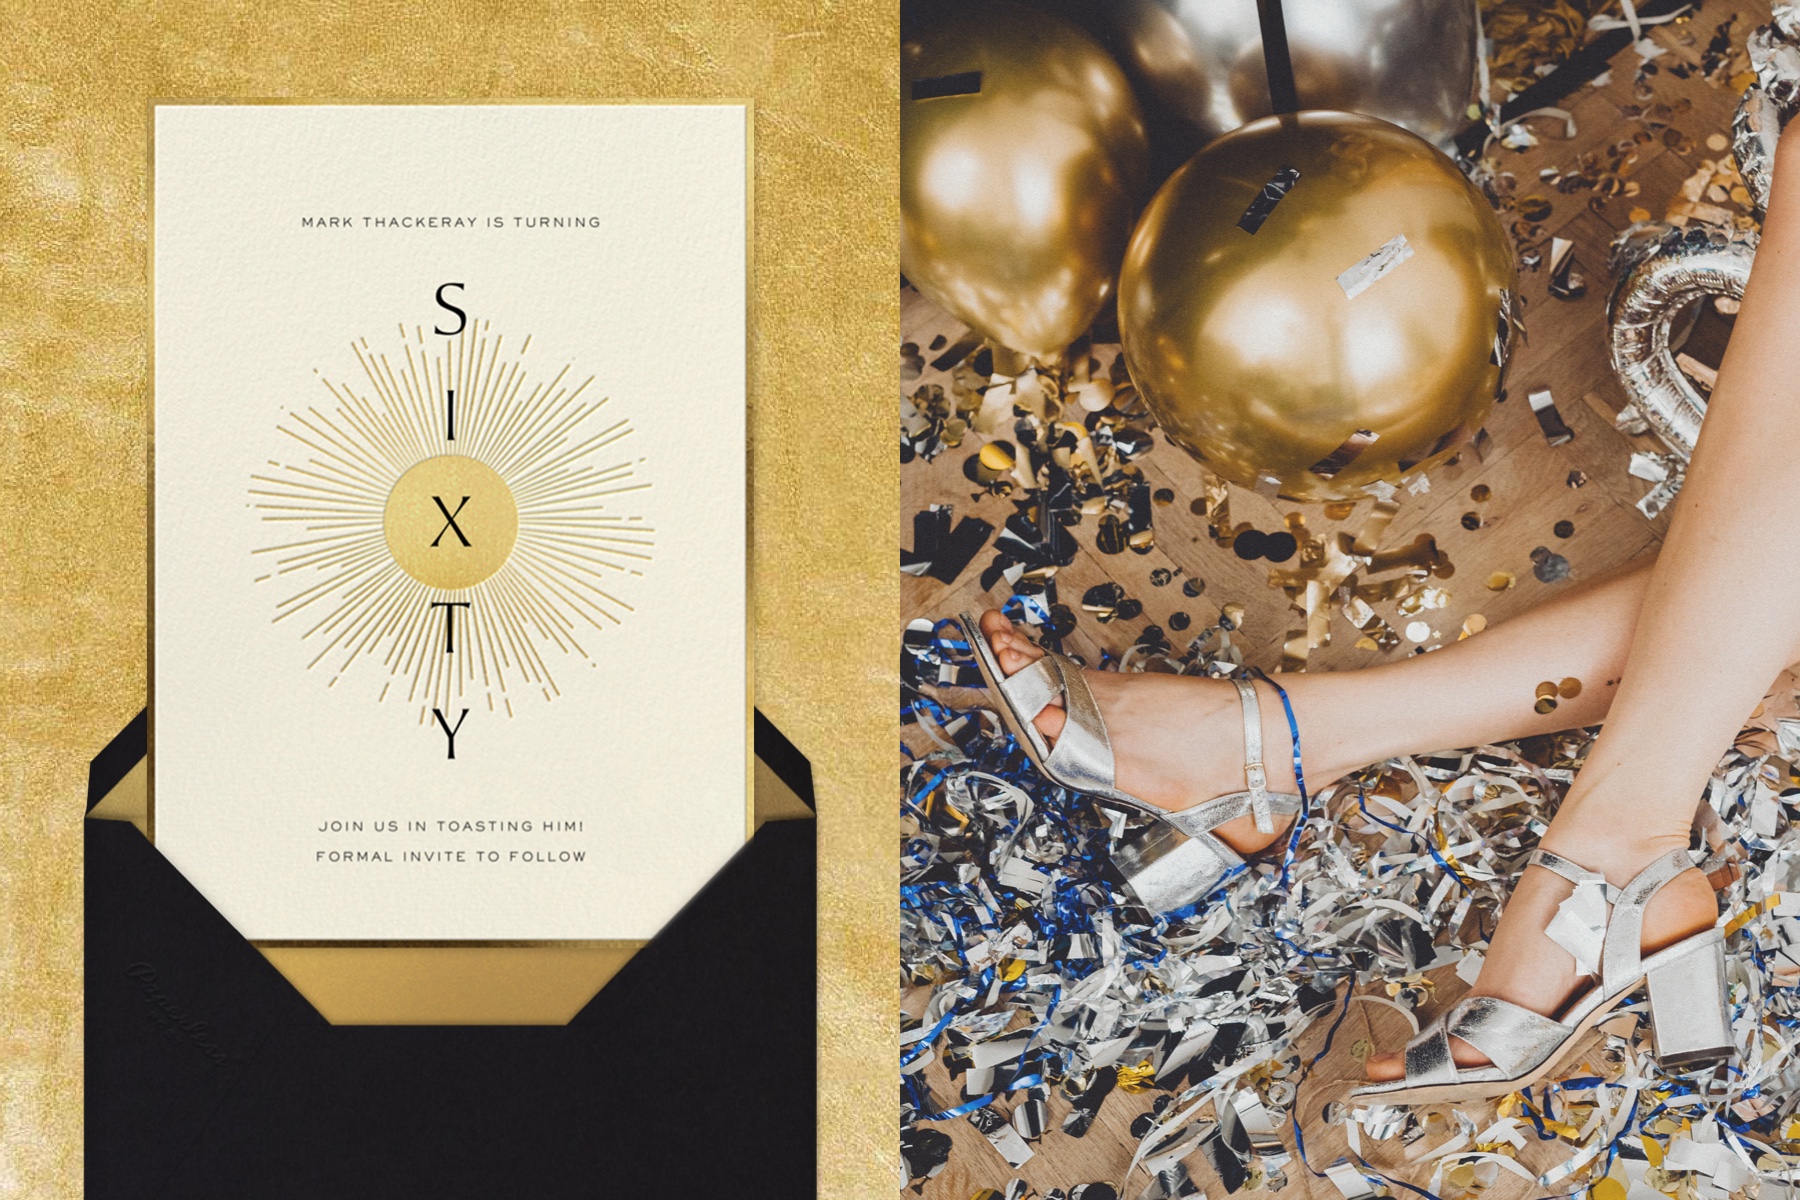 Left: “Around the Sun” invitation by Paperless Post featuring an illustration of a sun and vertical text on a gold background. | Right: Image of a woman’s feet in high heels. She’s laying on the ground surrounded by confetti as if she danced until she was tired.